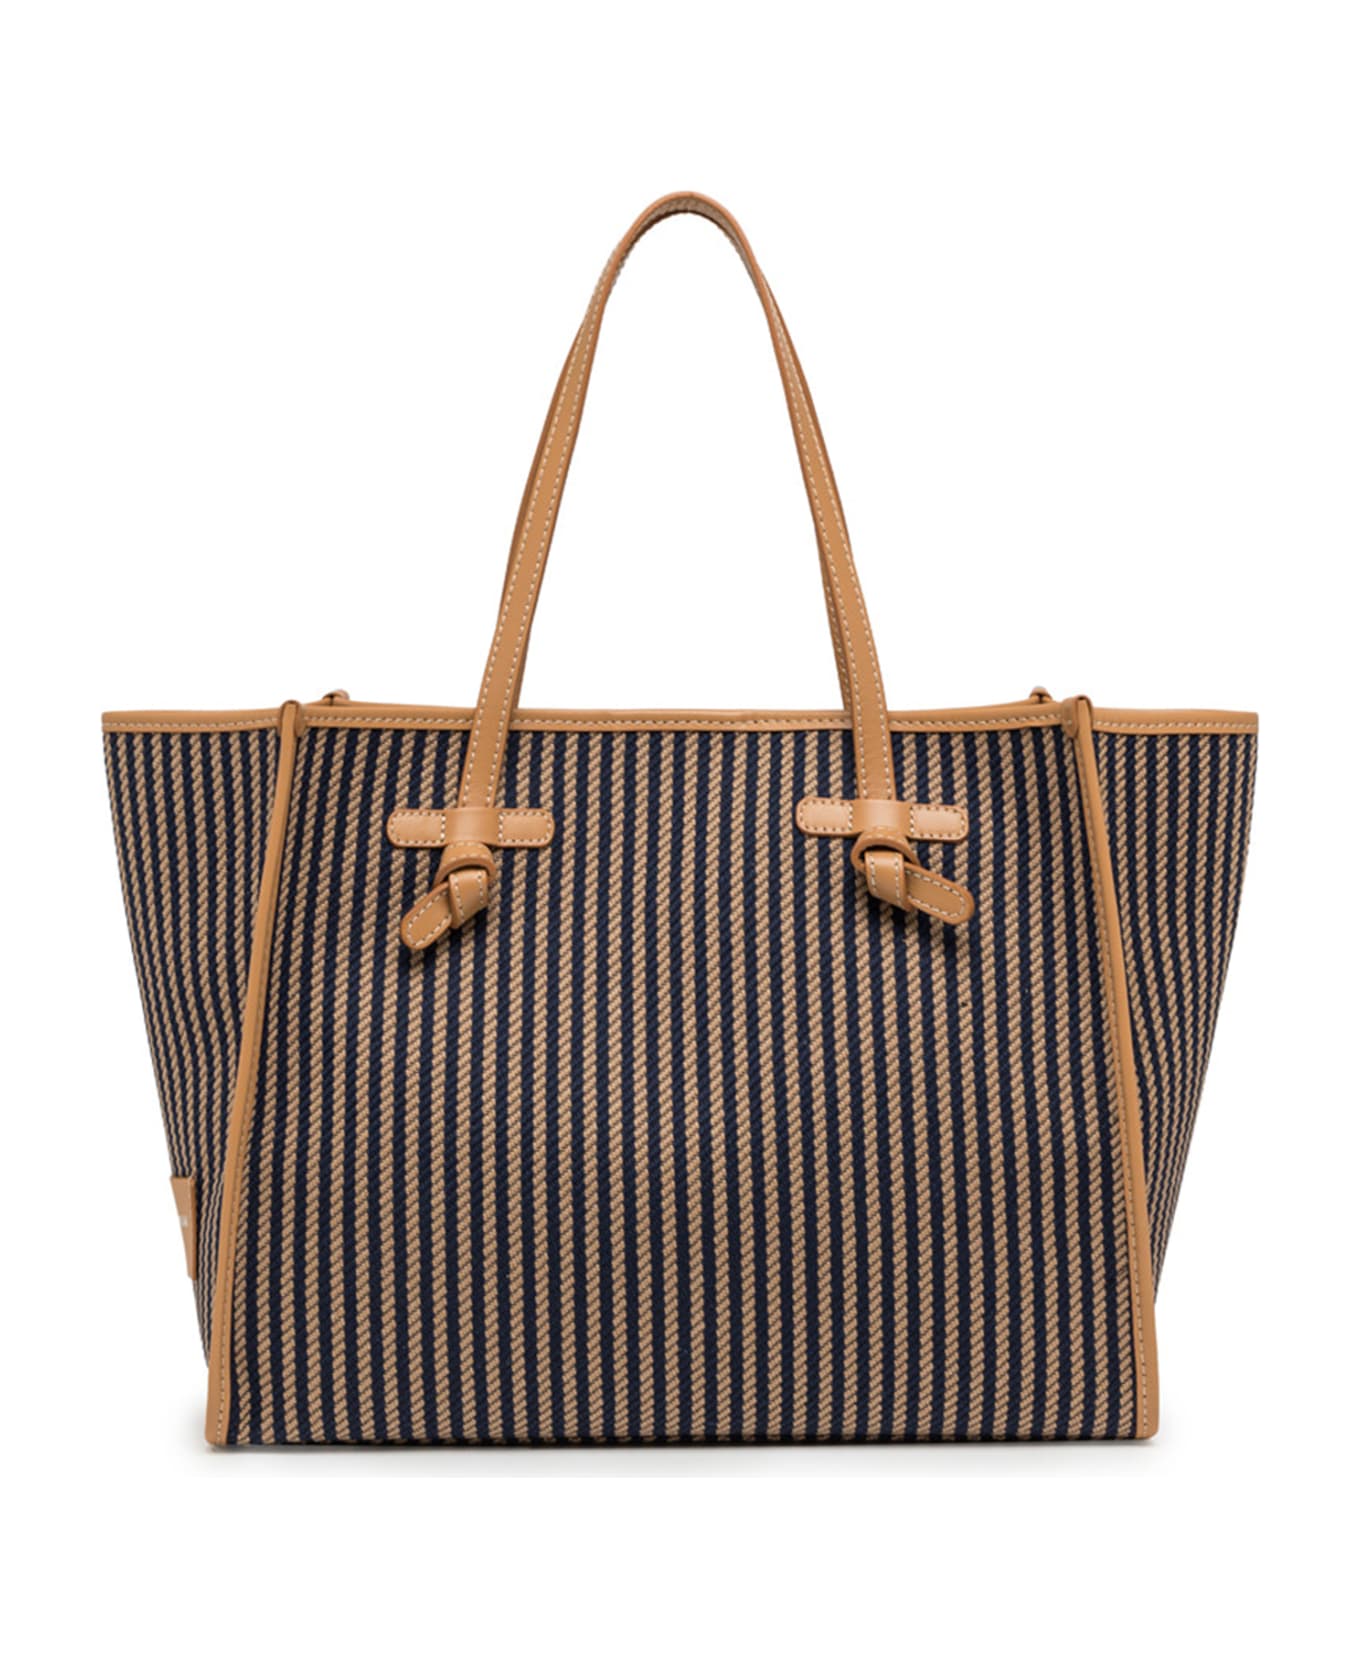 Gianni Chiarini Marcella Shopping Bag In Canvas With Striped Pattern - VAR.NAVY